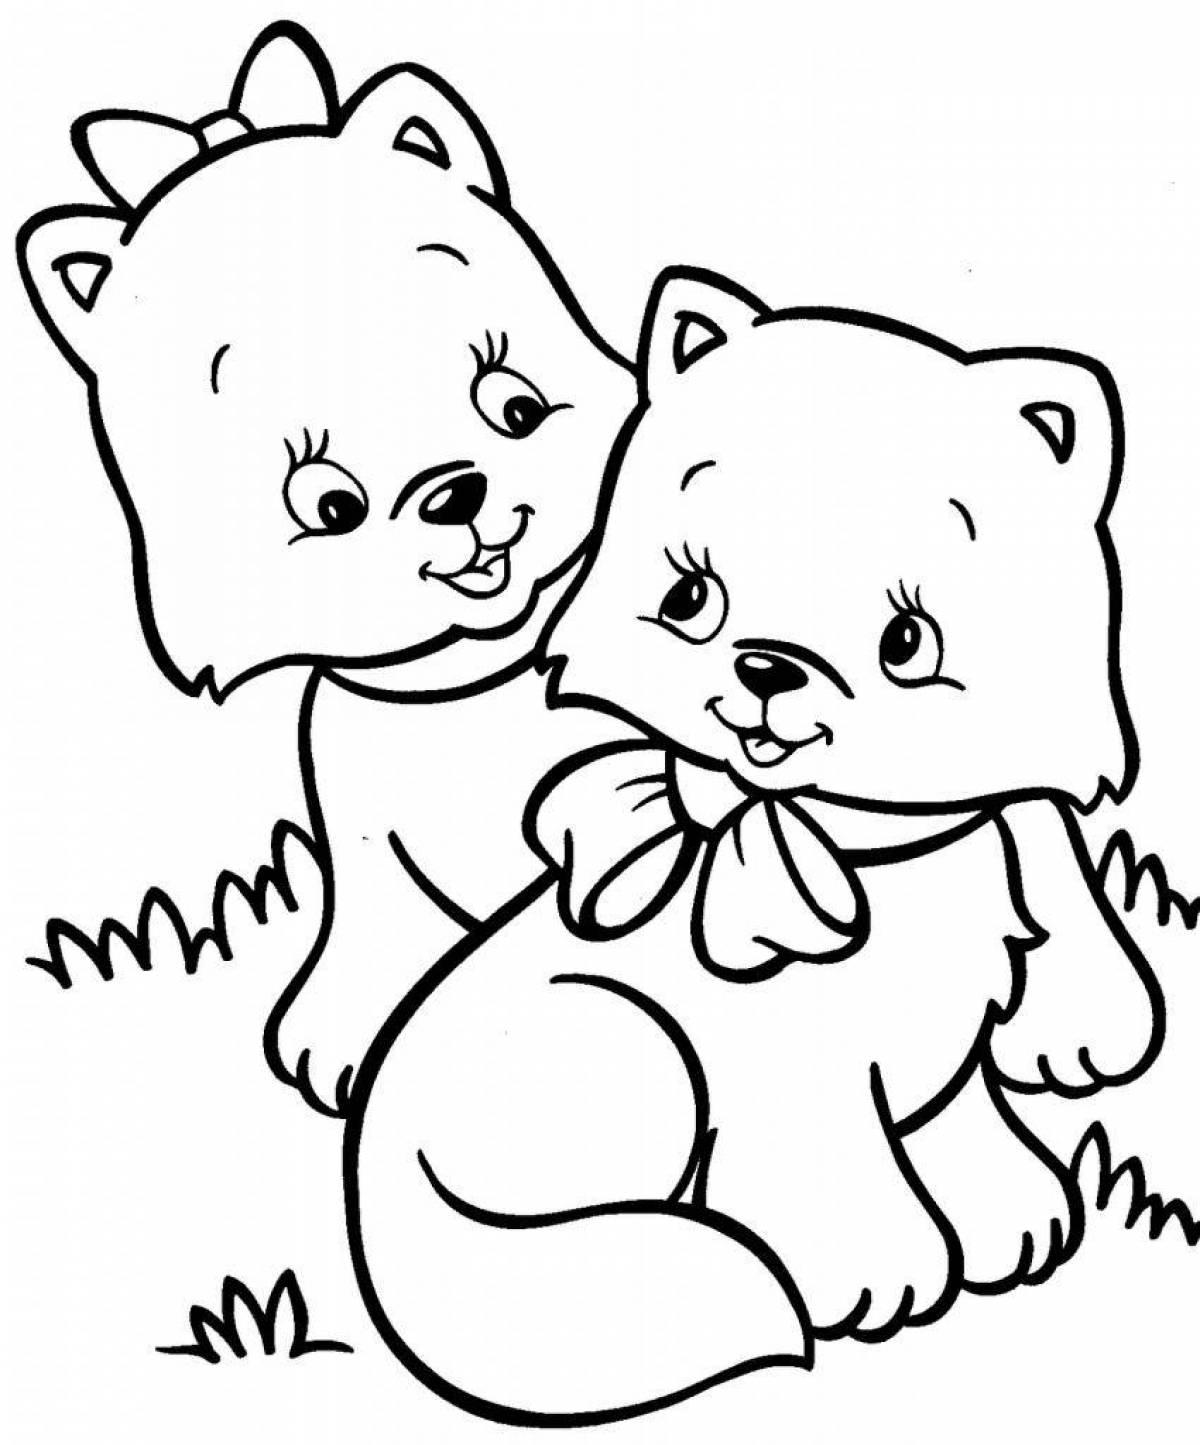 Gentle coloring for children 5-6 years old for girls animals